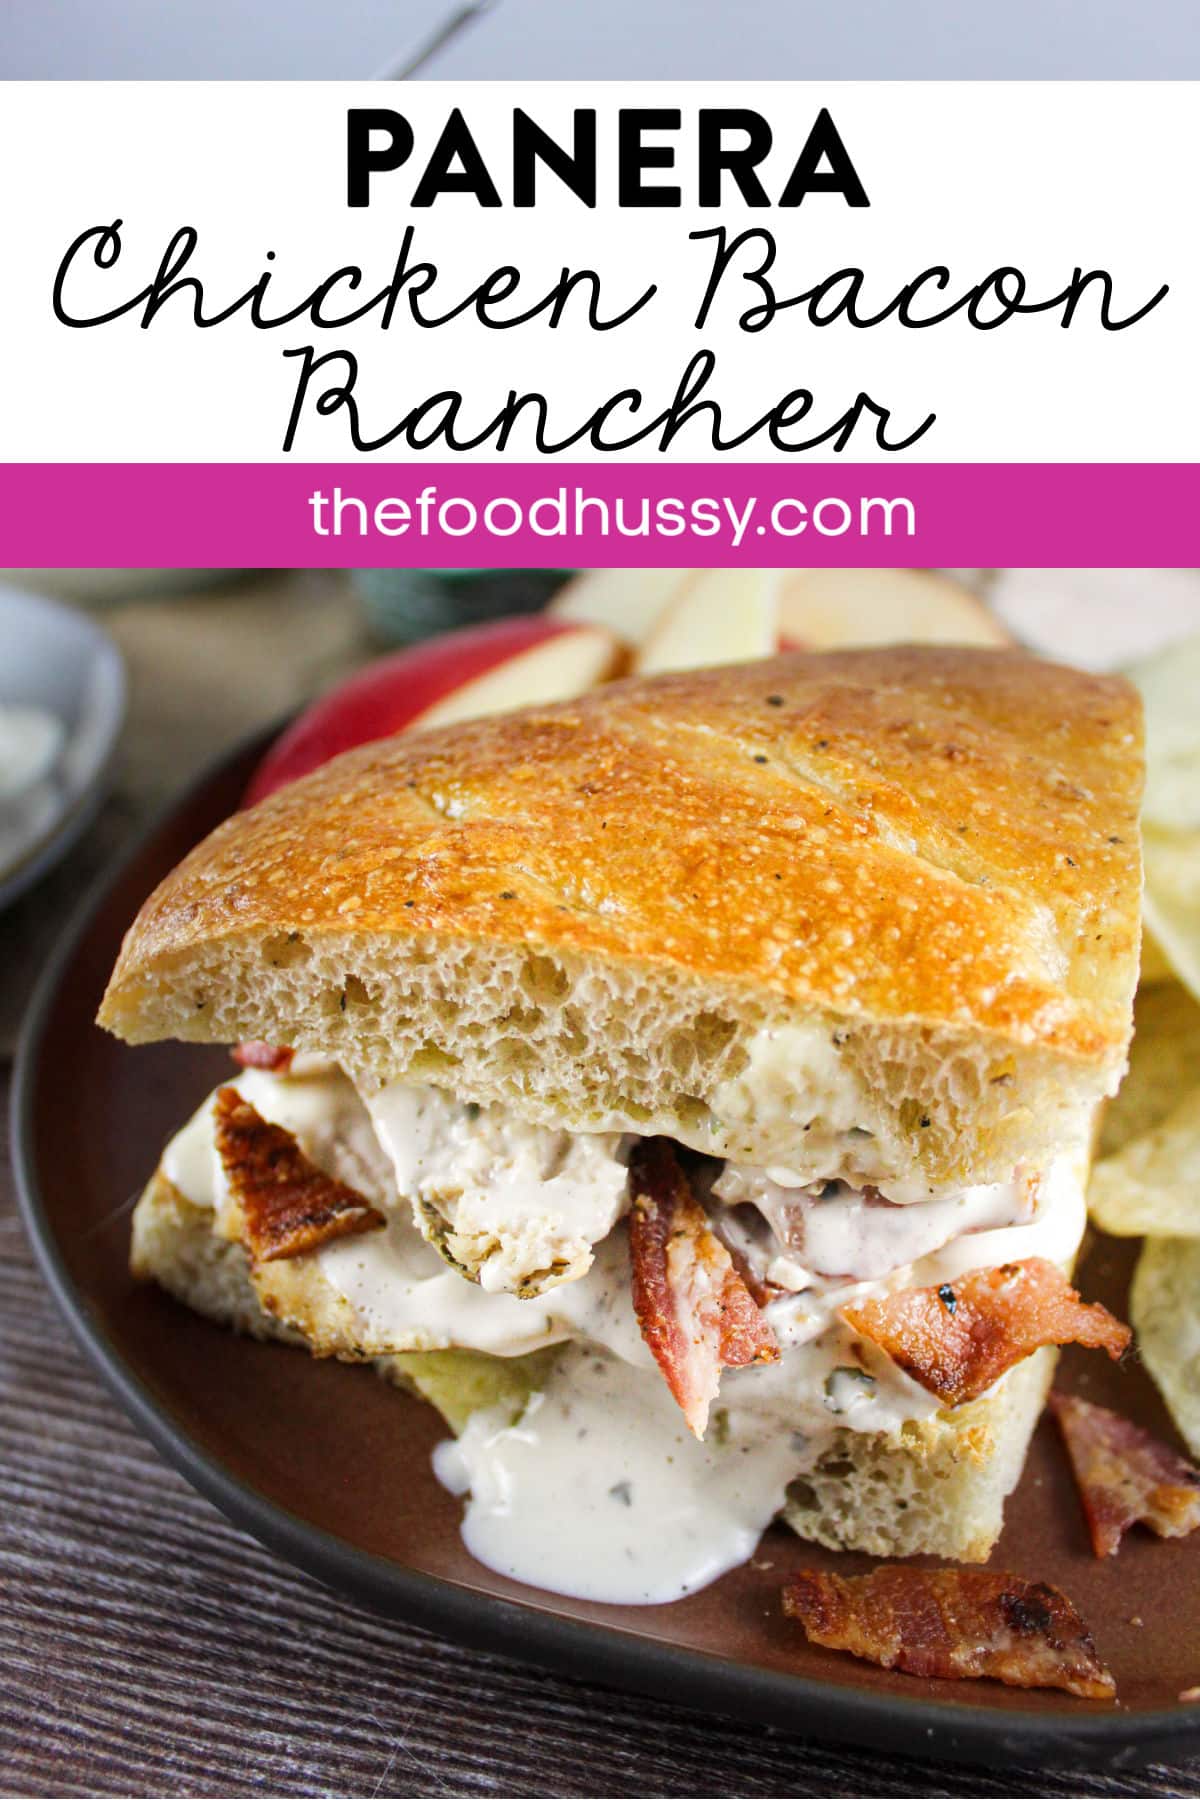 The new Panera Chicken Bacon Rancher is a tasty sandwich that is easy to make! Grilled chicken, thick cut smoked bacon, sliced white cheddar and homemade ranch on thick slices of Black Pepper Focaccia make a perfect Chicken Bacon Ranch Sandwich! via @foodhussy